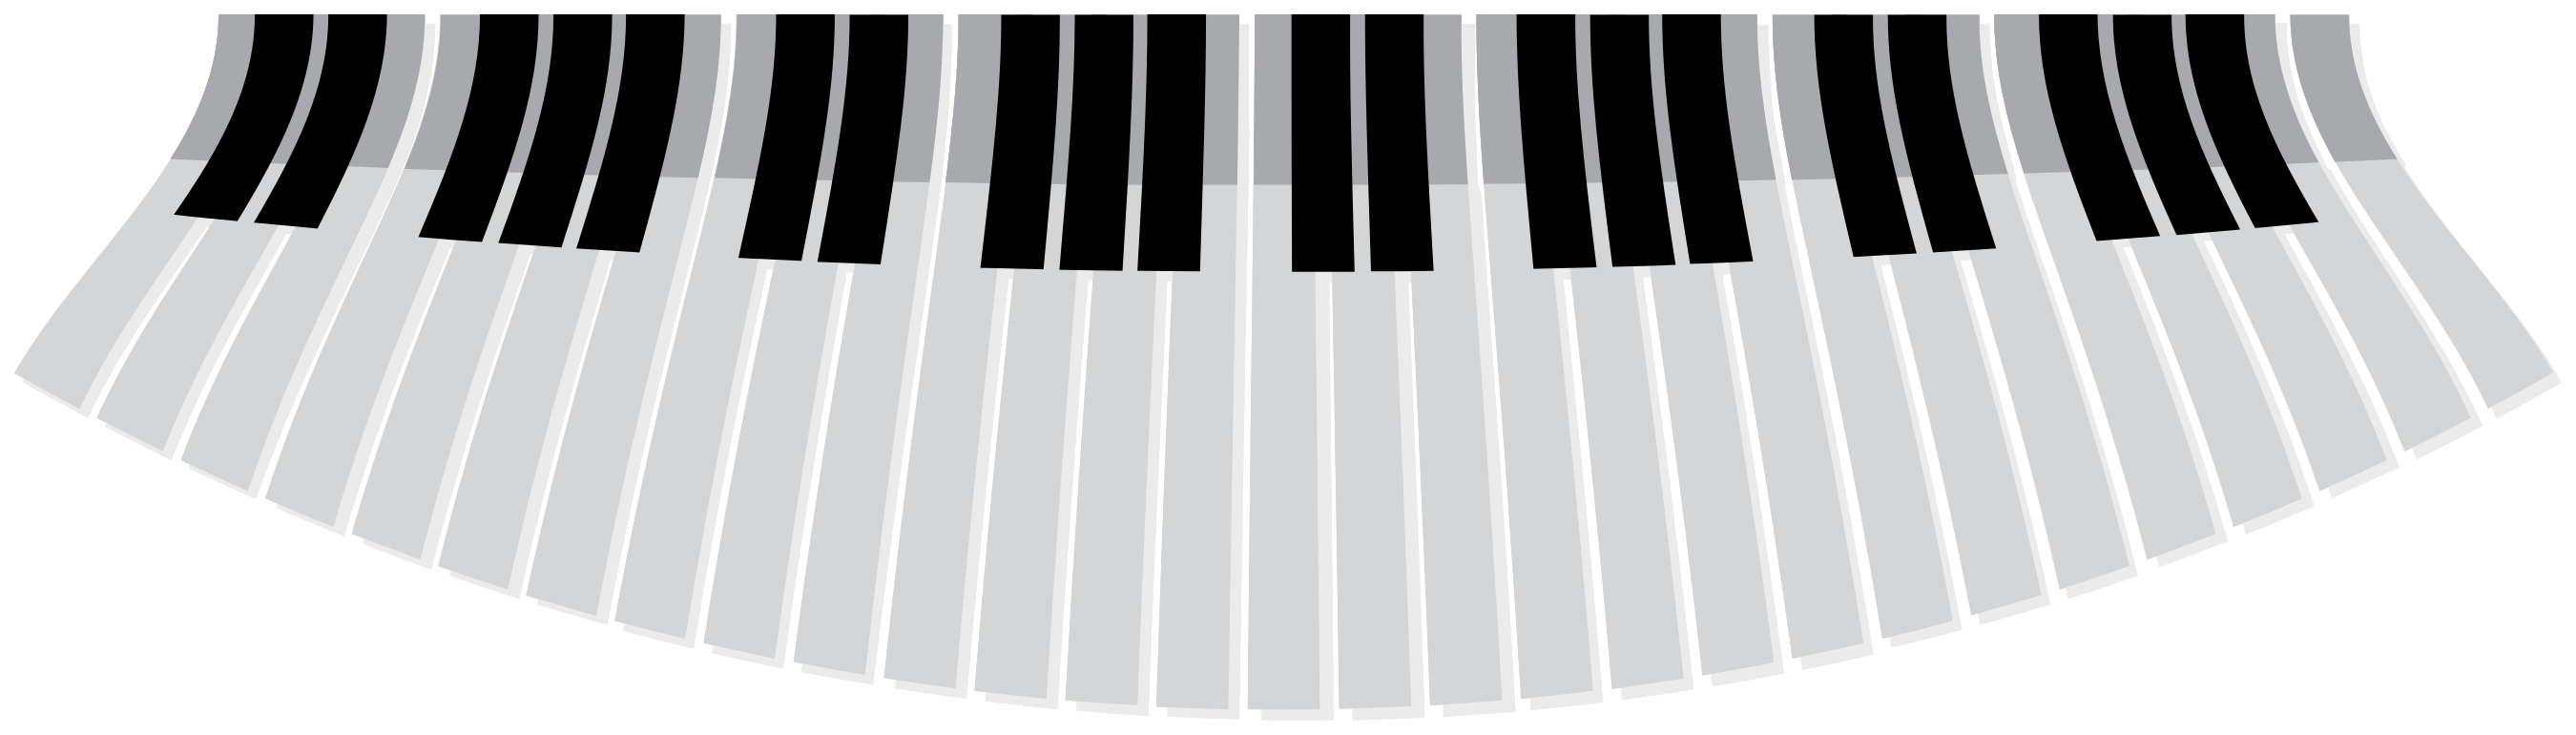 Free Piano Ondulato Png With Transparent Background